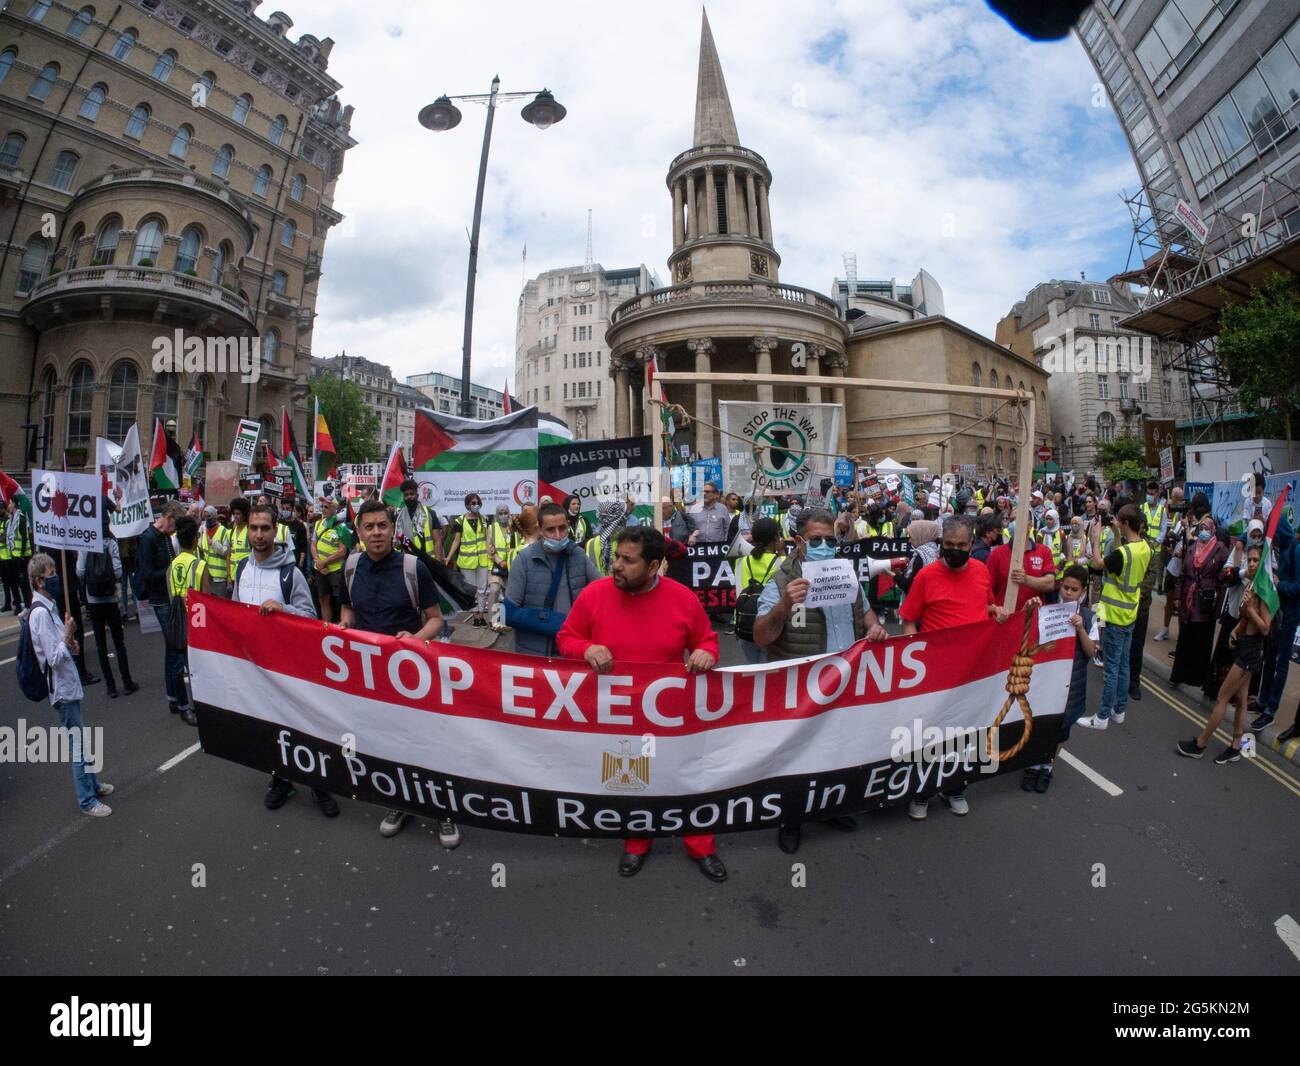 London protests, Activists protest in Central London at the People's Assembly National Demonstration, protesters demonstrate the rising number of executions in Egypt with banner reading stop executions for political reasons in Egypt Stock Photo